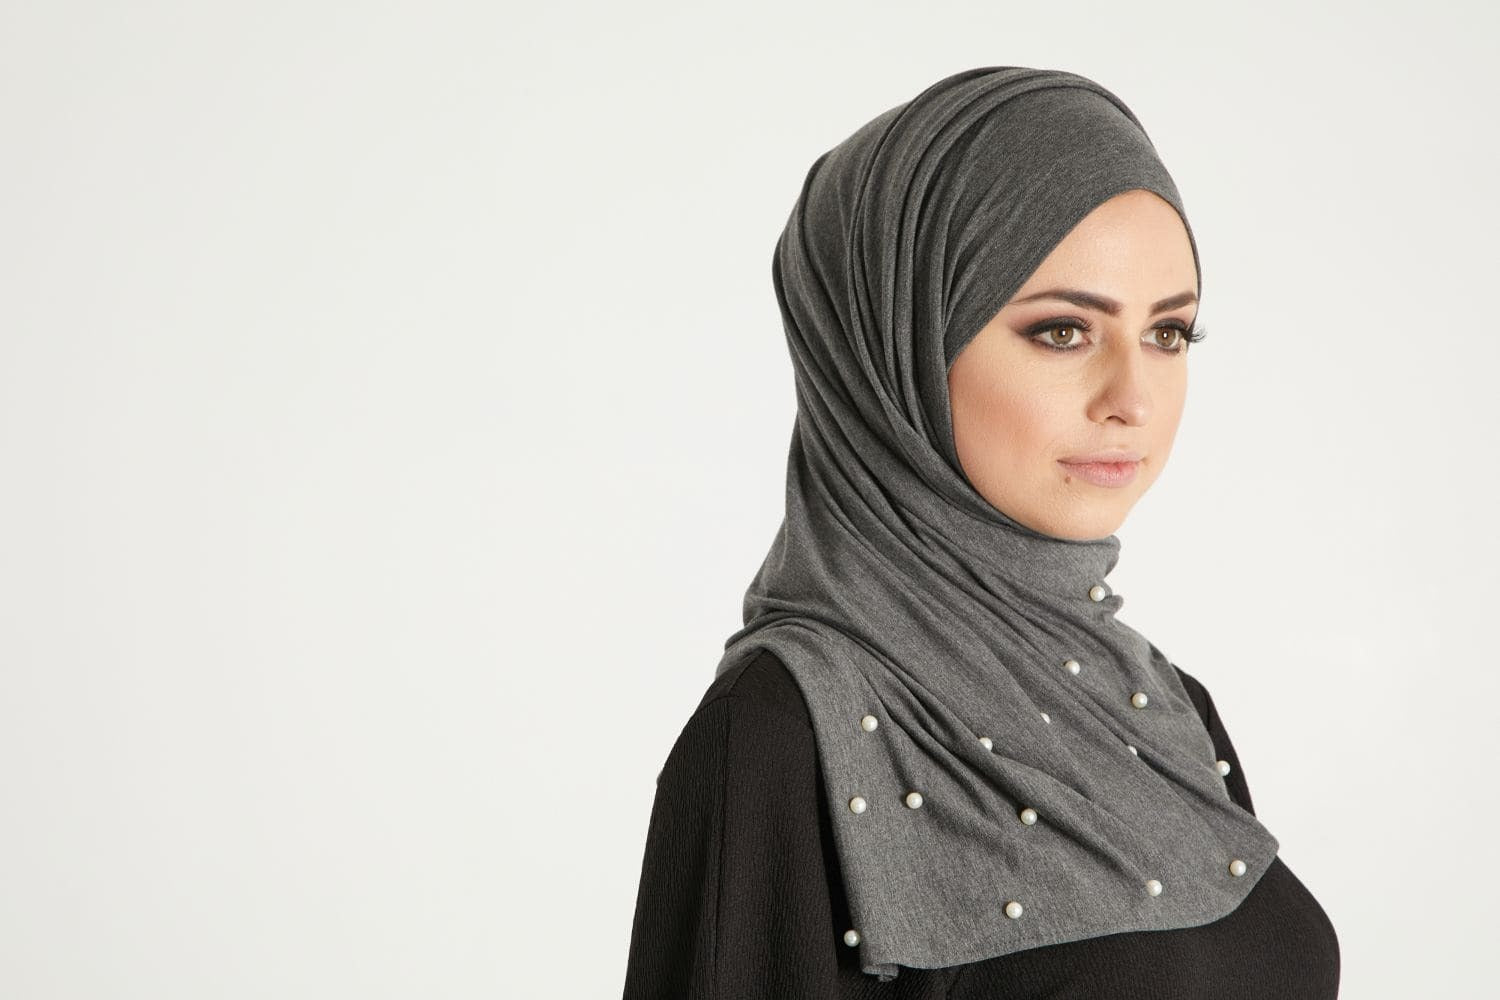 Hijab Hairstyles: How to Wear Your Hair Underneath